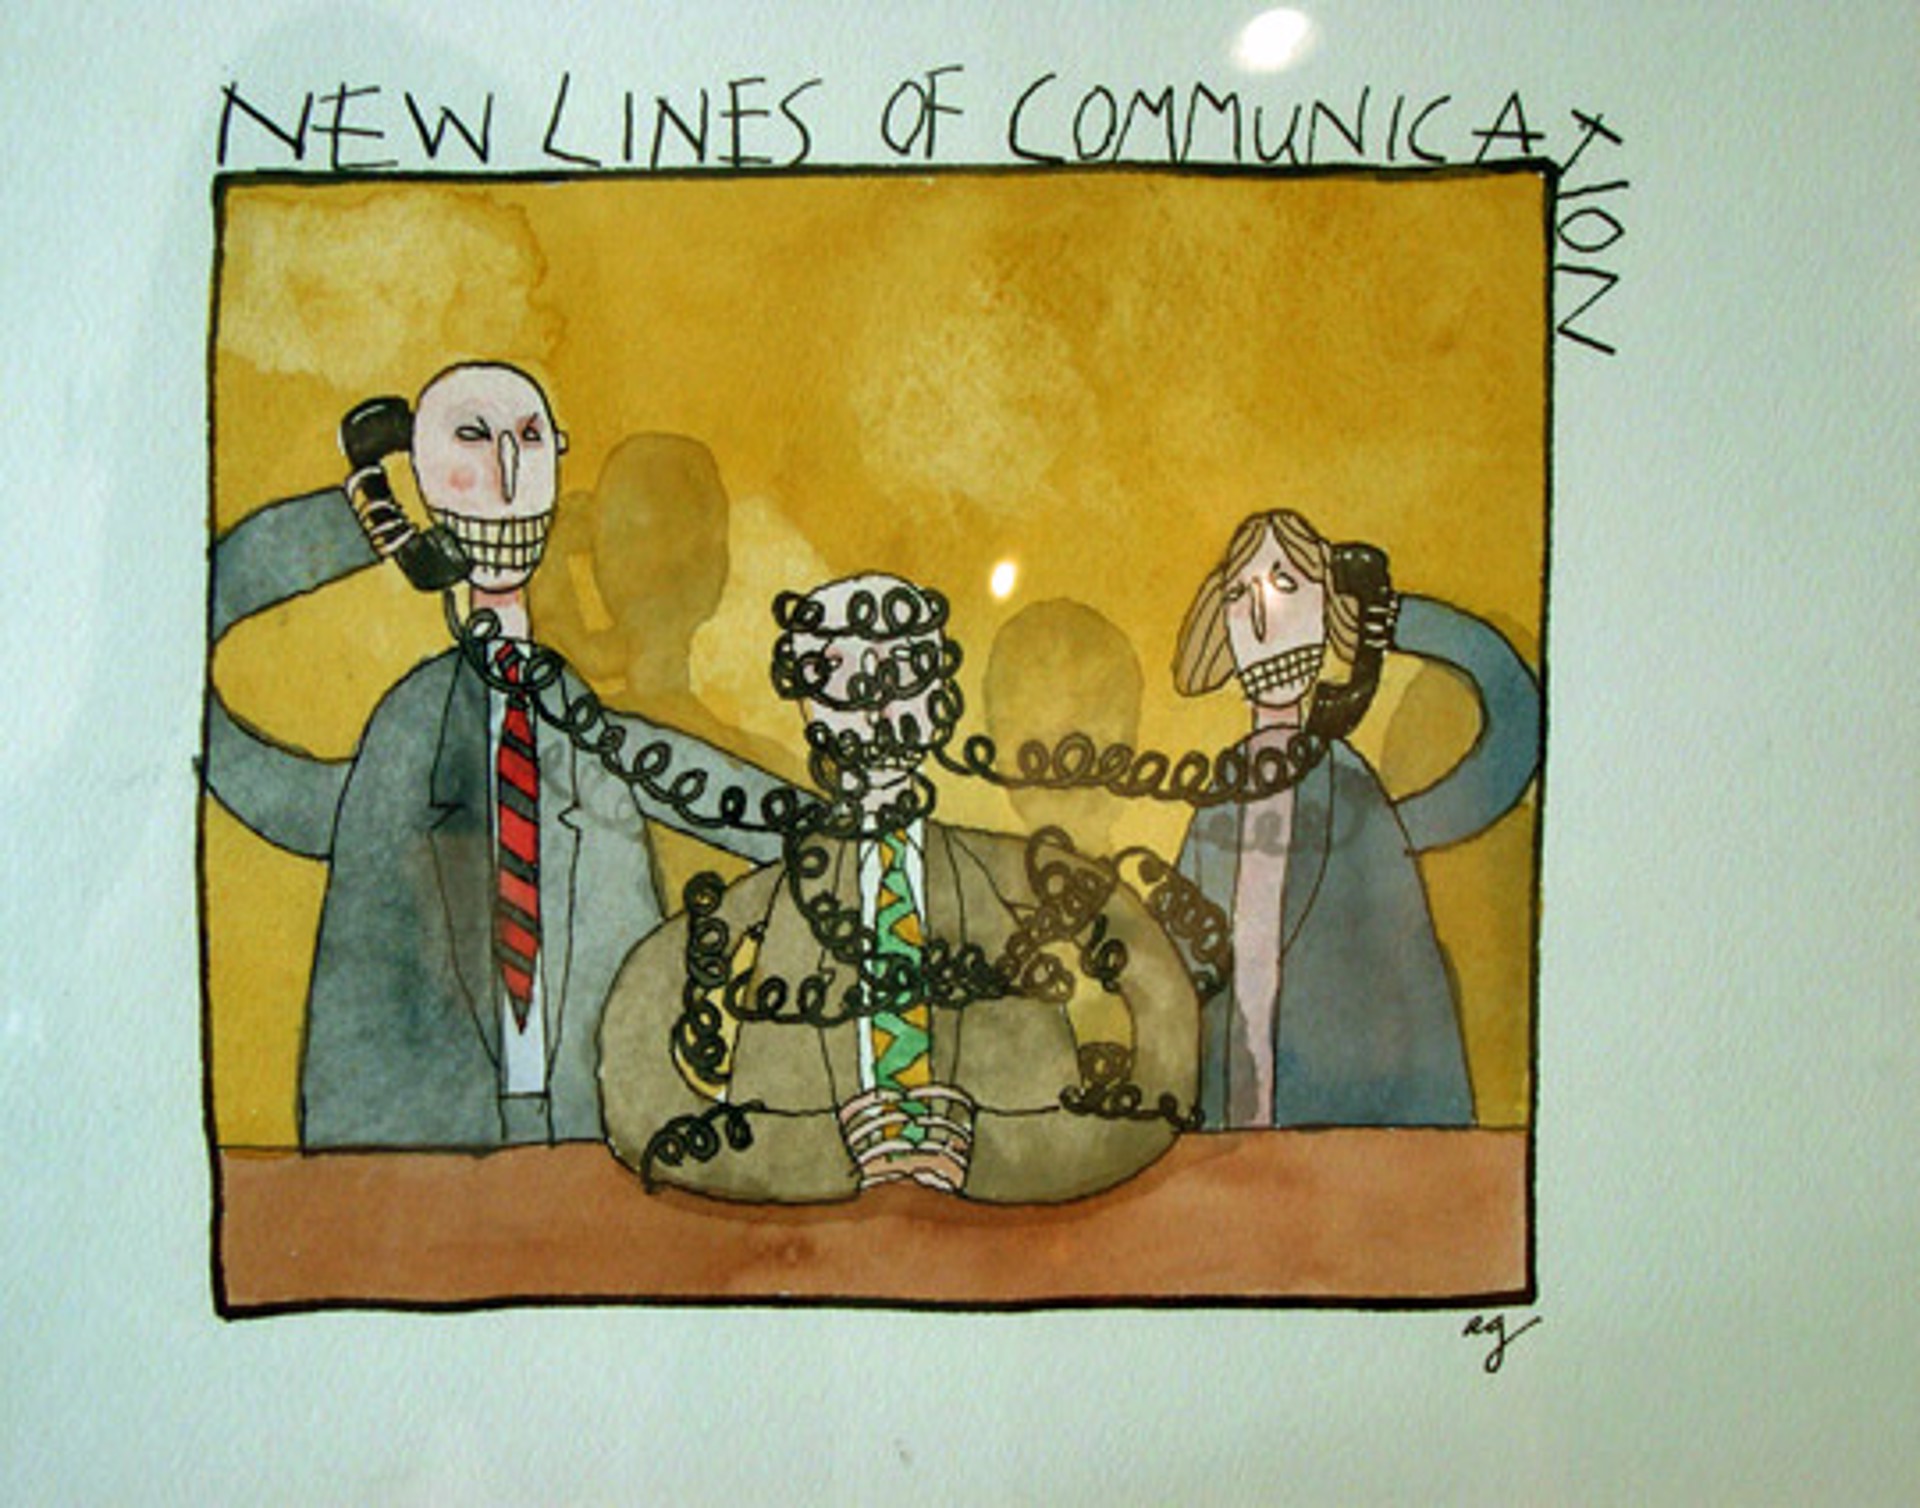 New Lines of Communication by Alan Gerson